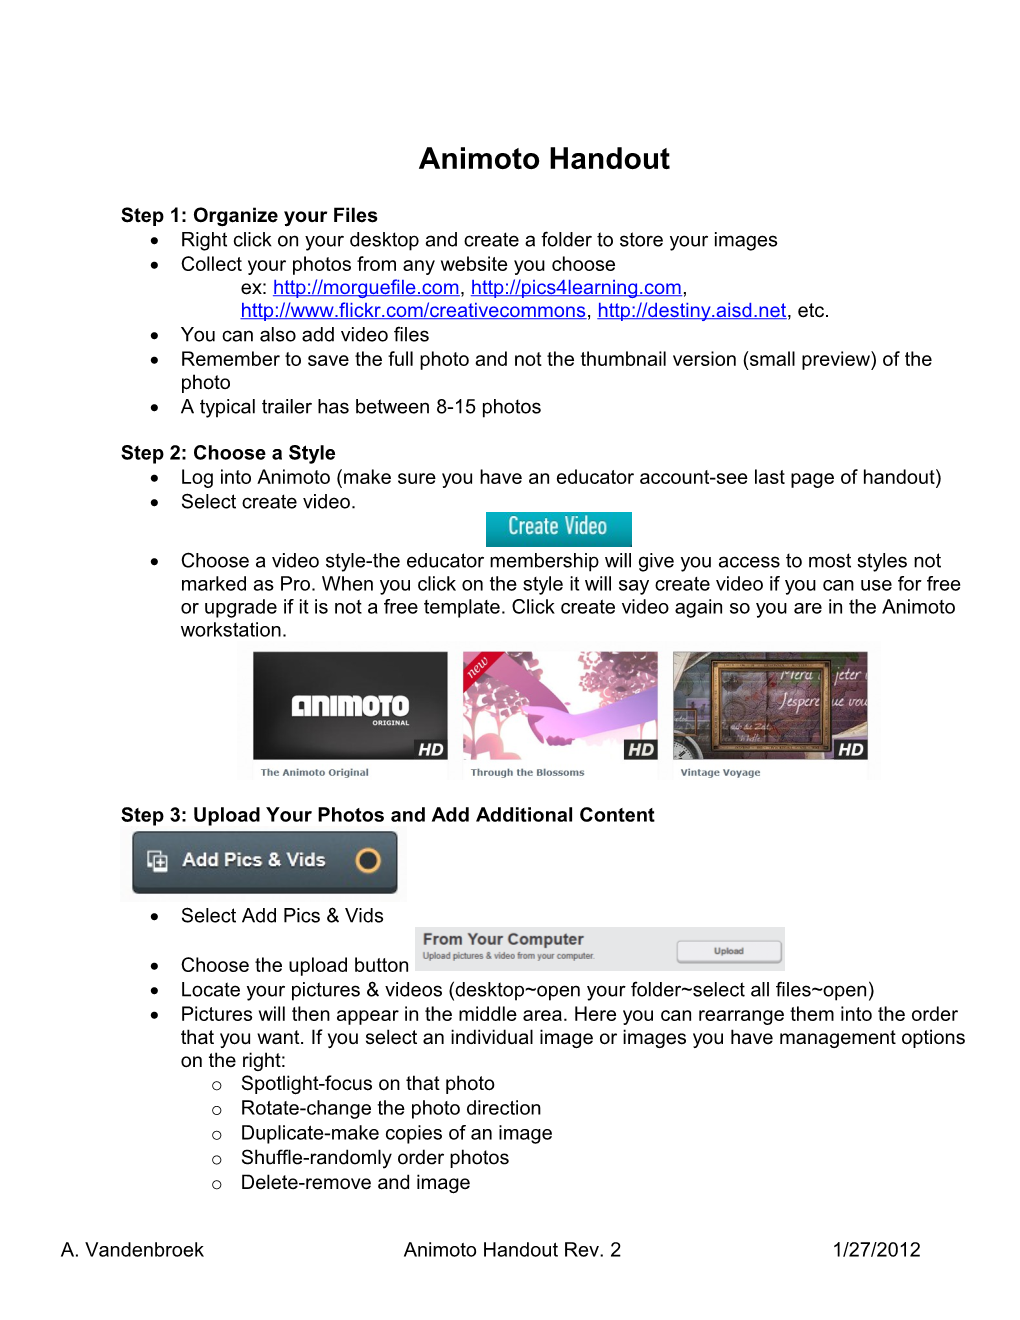 Animoto Fast and Simple